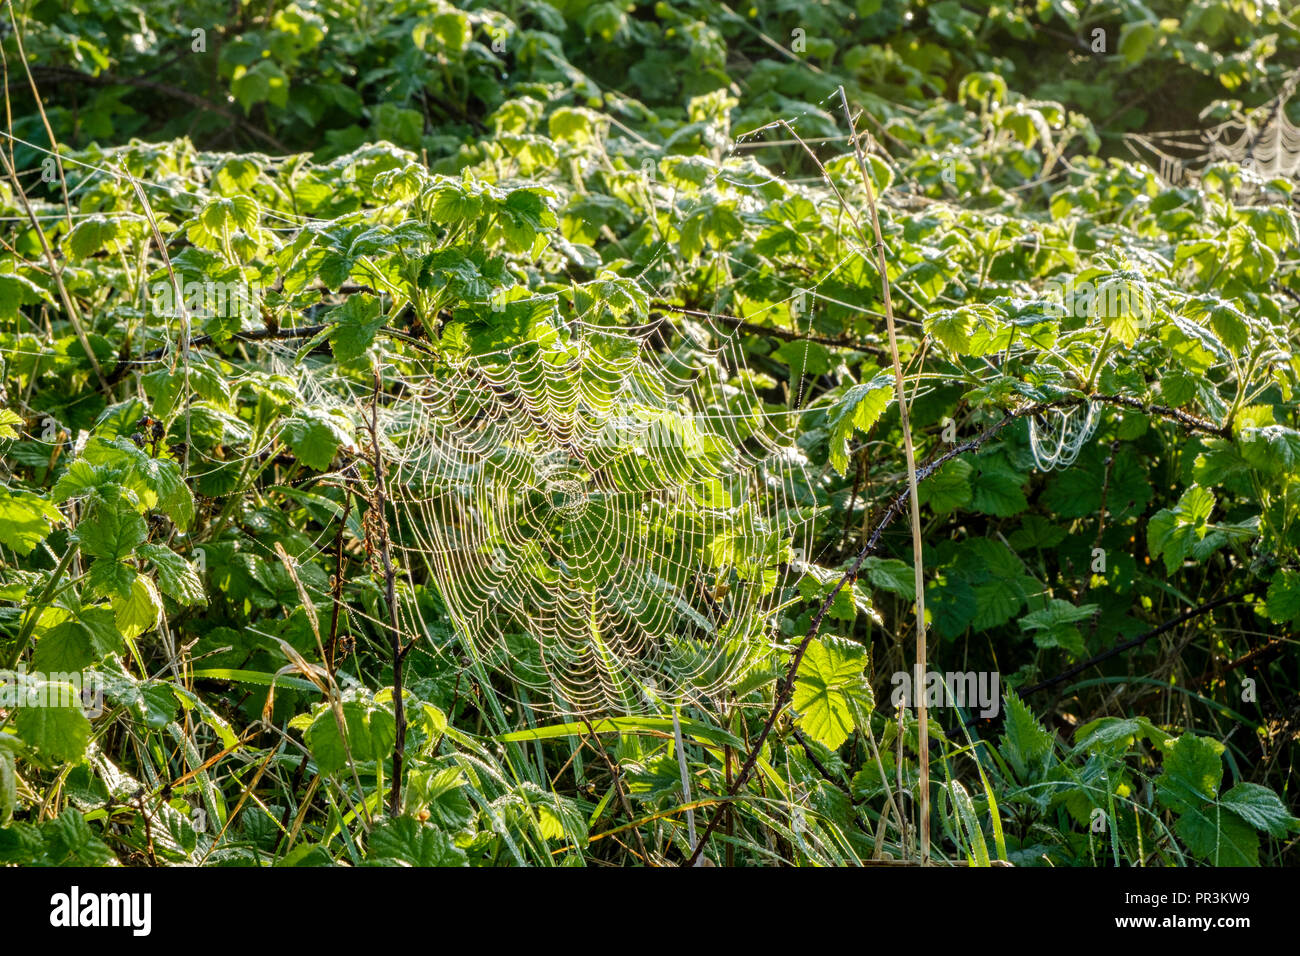 Early morning dew and sunlight on a spider's web woven over a bush, Nottinghamshire, England, UK Stock Photo